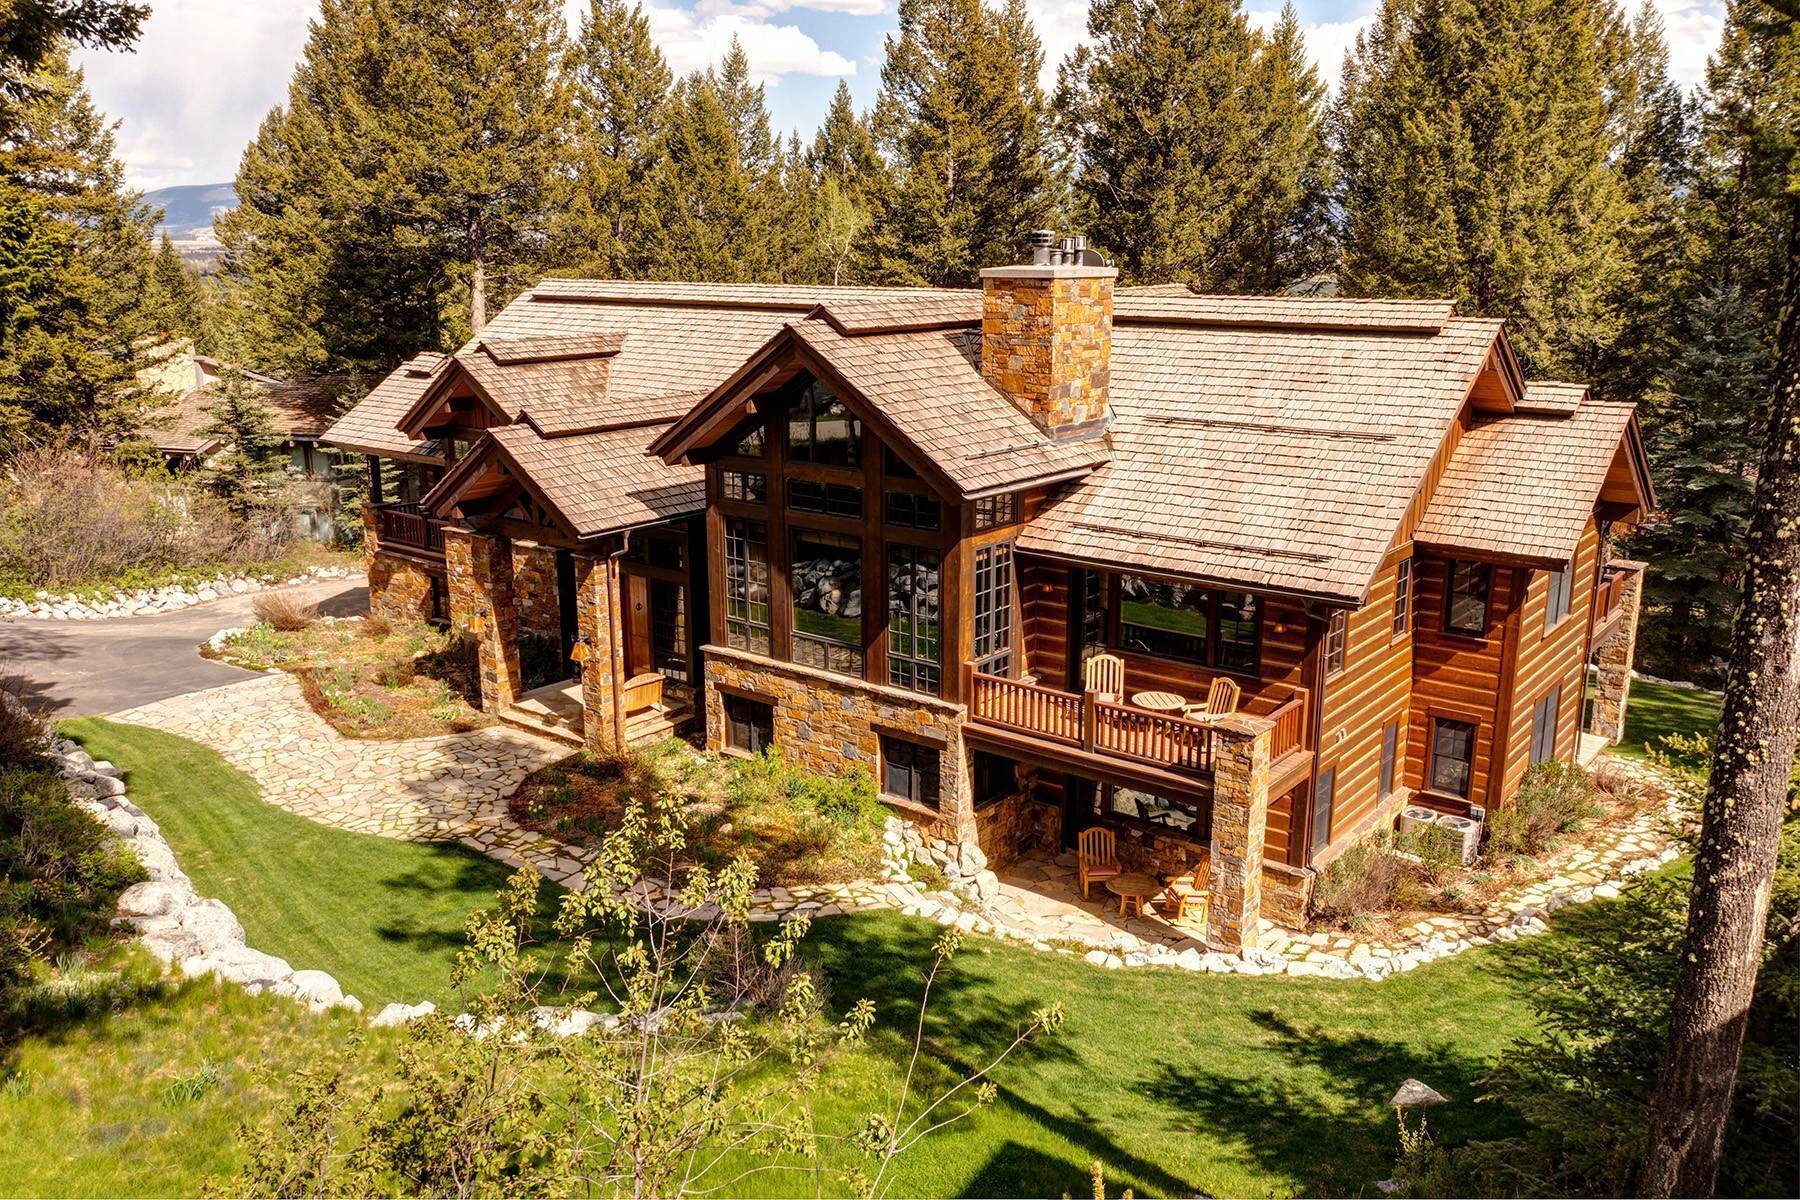 Single Family Homes for Sale at West Curtis Drive 3730 W Curtis Drive Teton Village, Wyoming 83025 United States